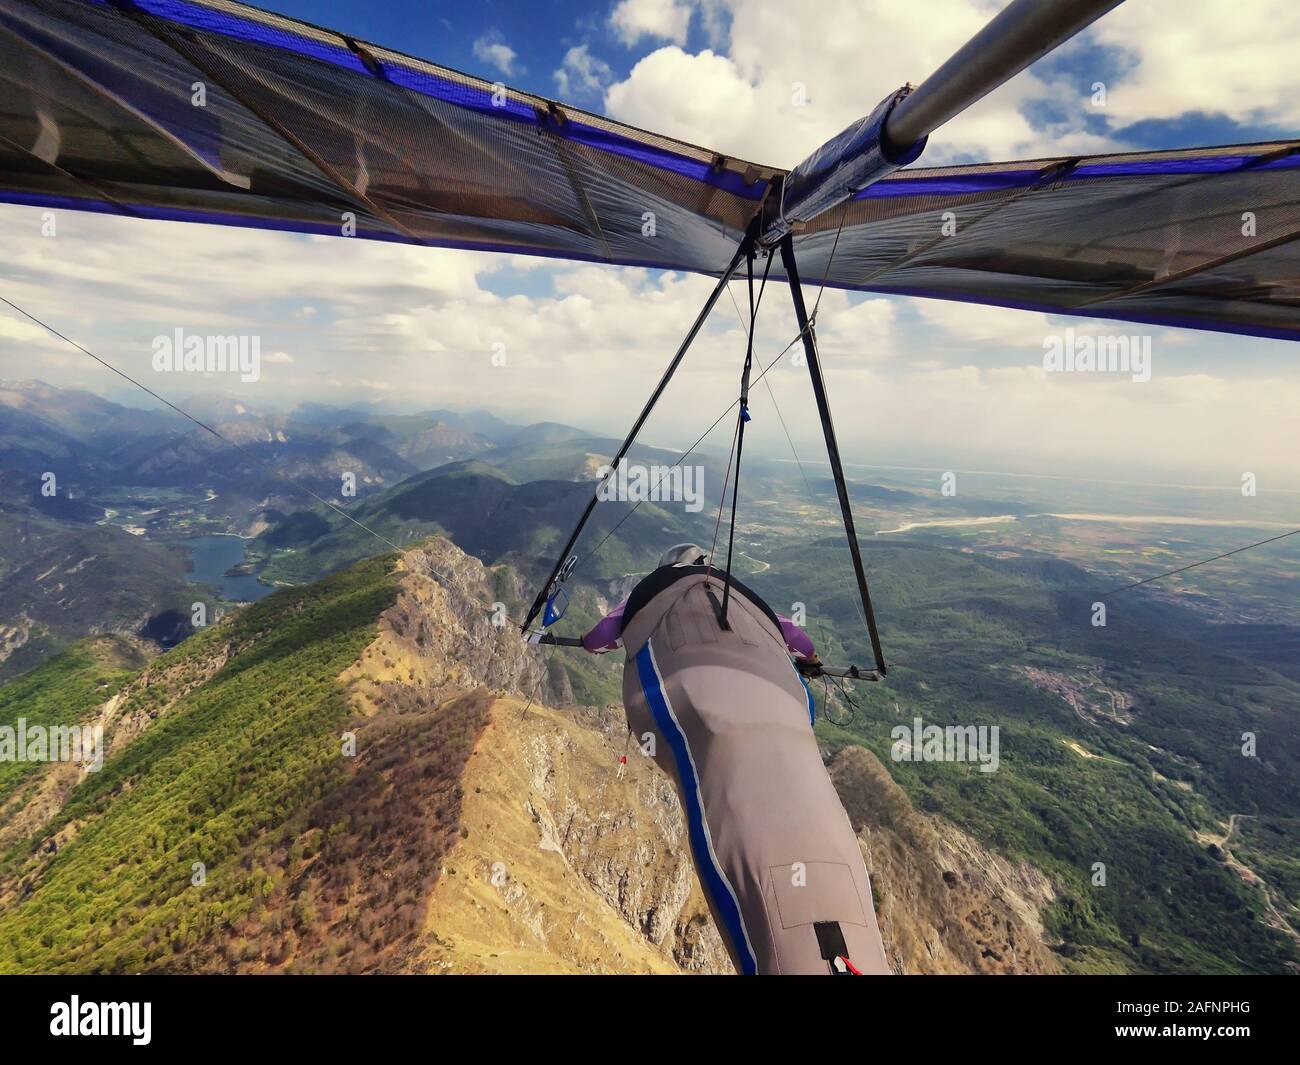 Hang gliding in the mountains. Hang glider pilot fly high above beautiful terrain in Meduno, Italy. Stock Photo